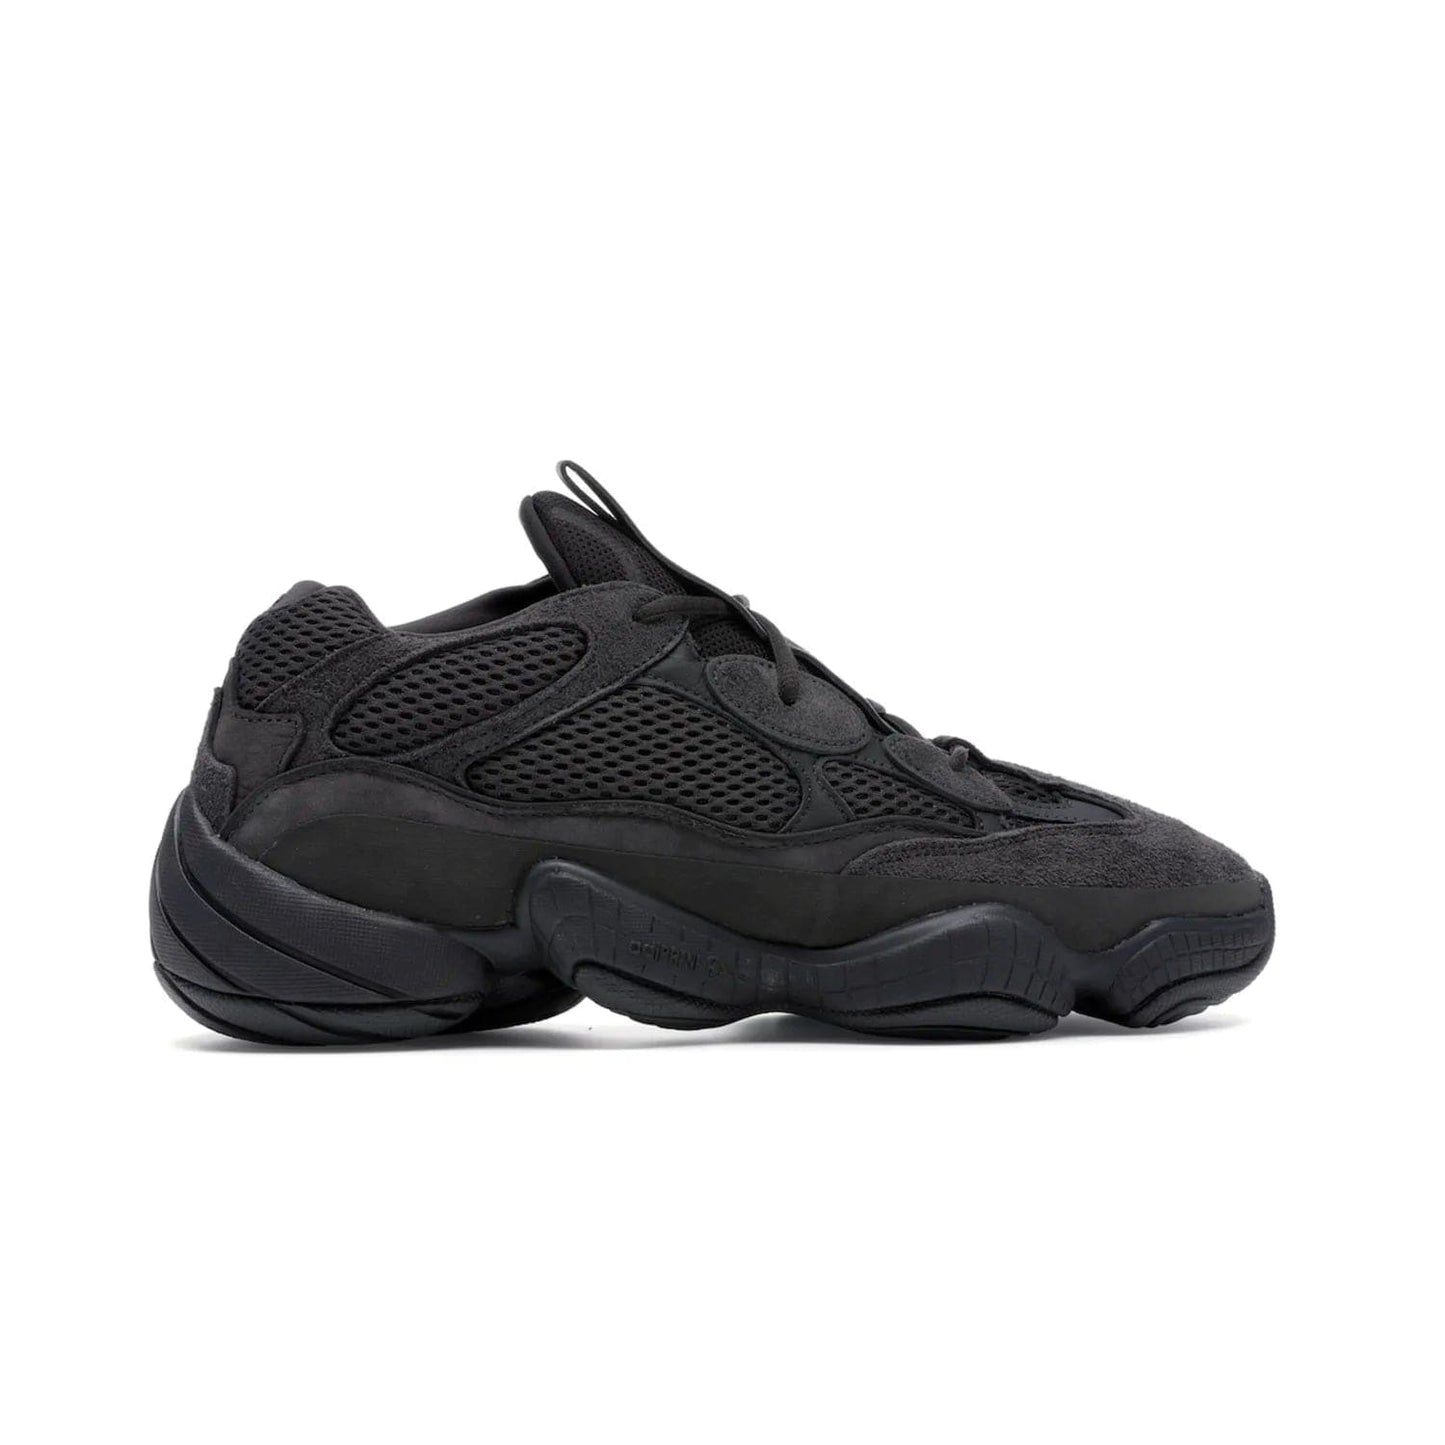 adidas Yeezy 500 Utility Black - Image 36 - Only at www.BallersClubKickz.com - Iconic adidas Yeezy 500 Utility Black in All-Black colorway. Durable black mesh and suede upper with adiPRENE® sole delivers comfort and support. Be unstoppable with the Yeezy 500 Utility Black. Released July 2018.